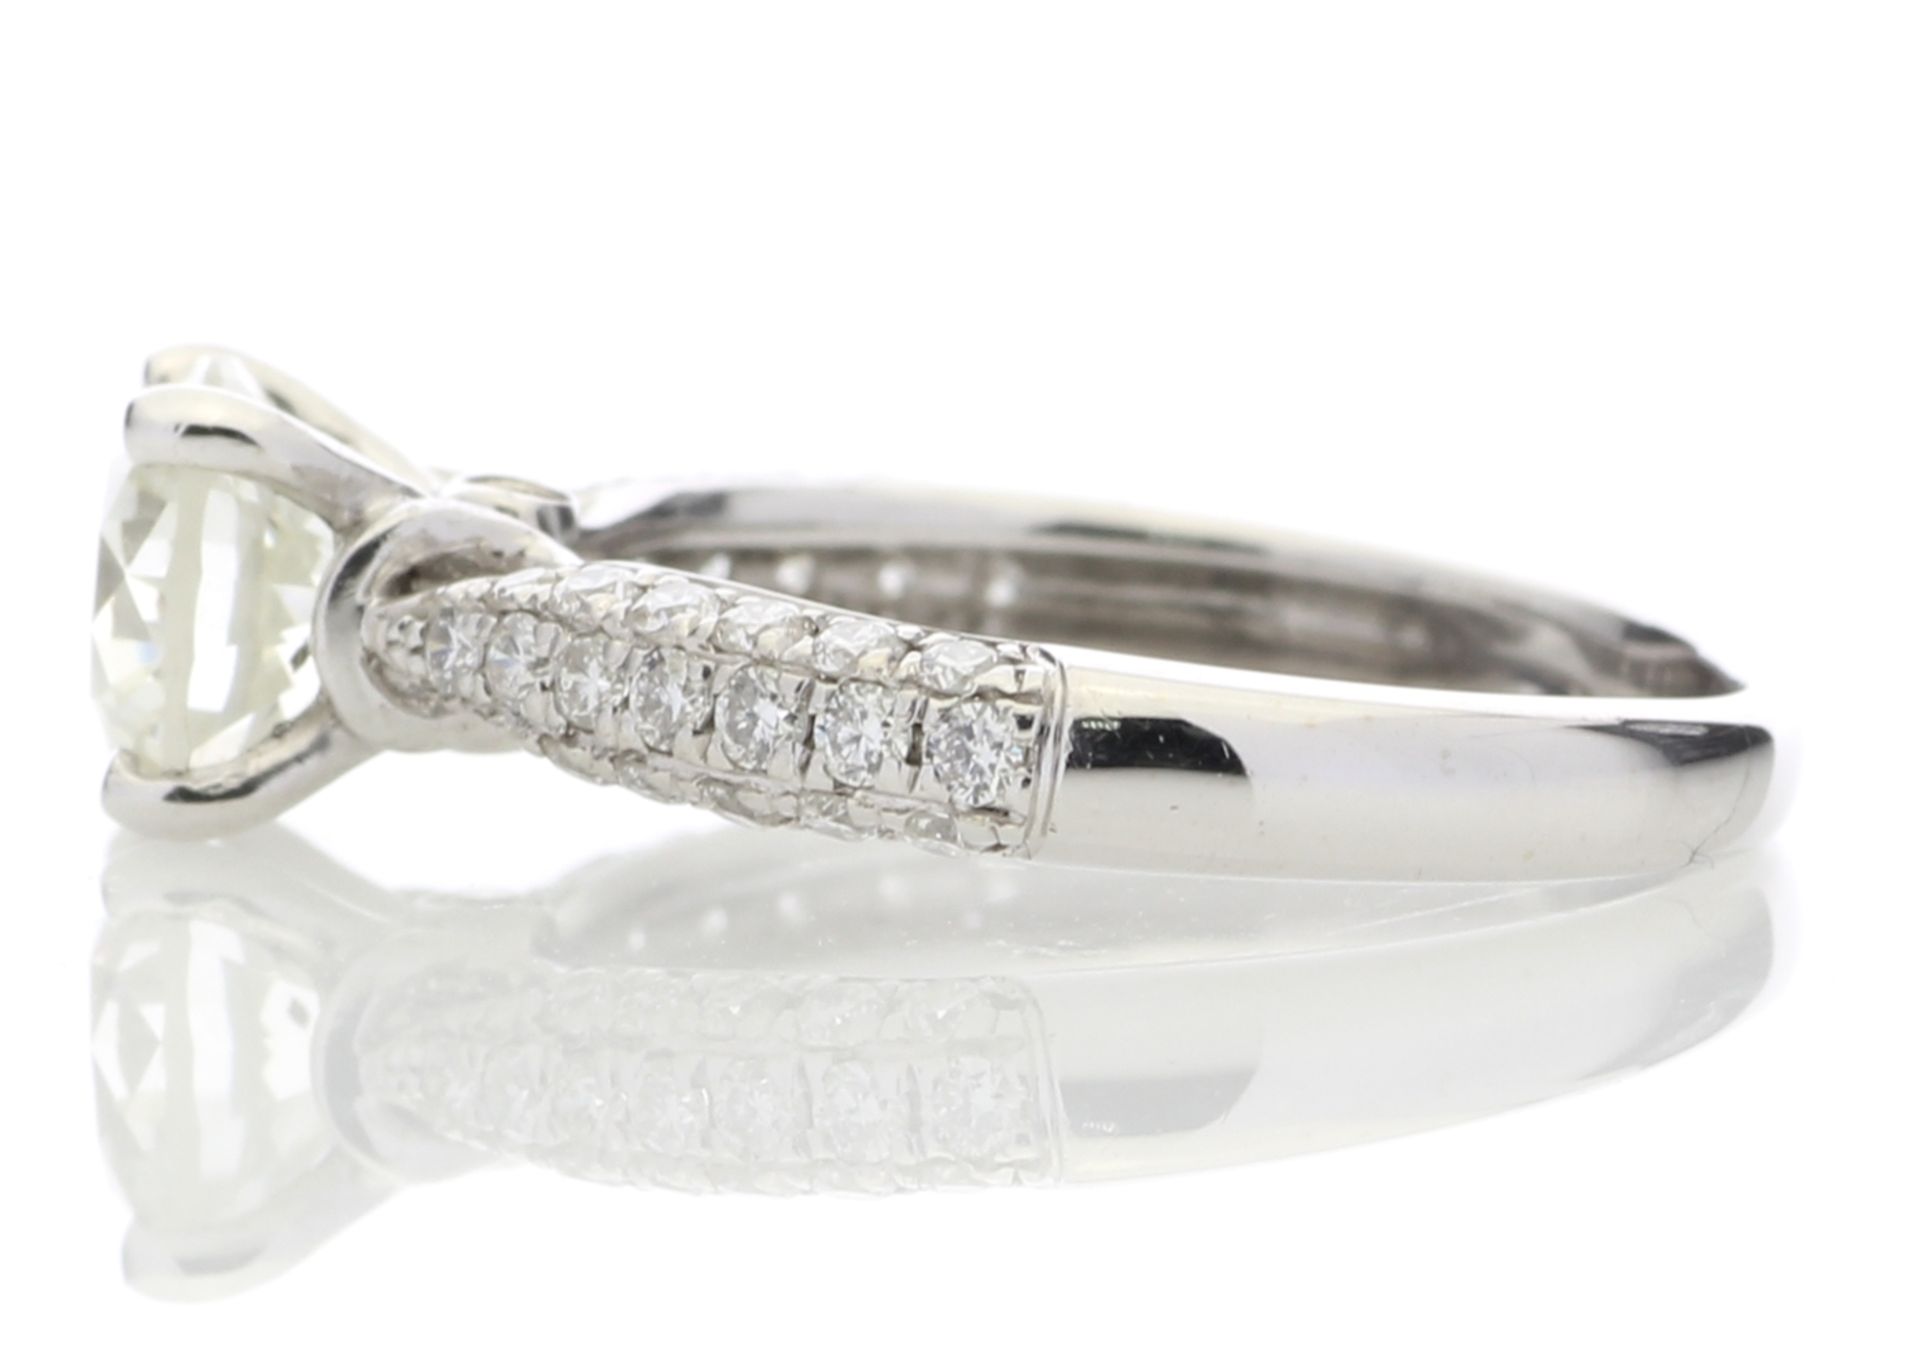 18ct White Gold Diamond Ring With Stone Set Shoulders 1.38 Carats - Valued By GIE £27,950.00 - A - Image 3 of 5